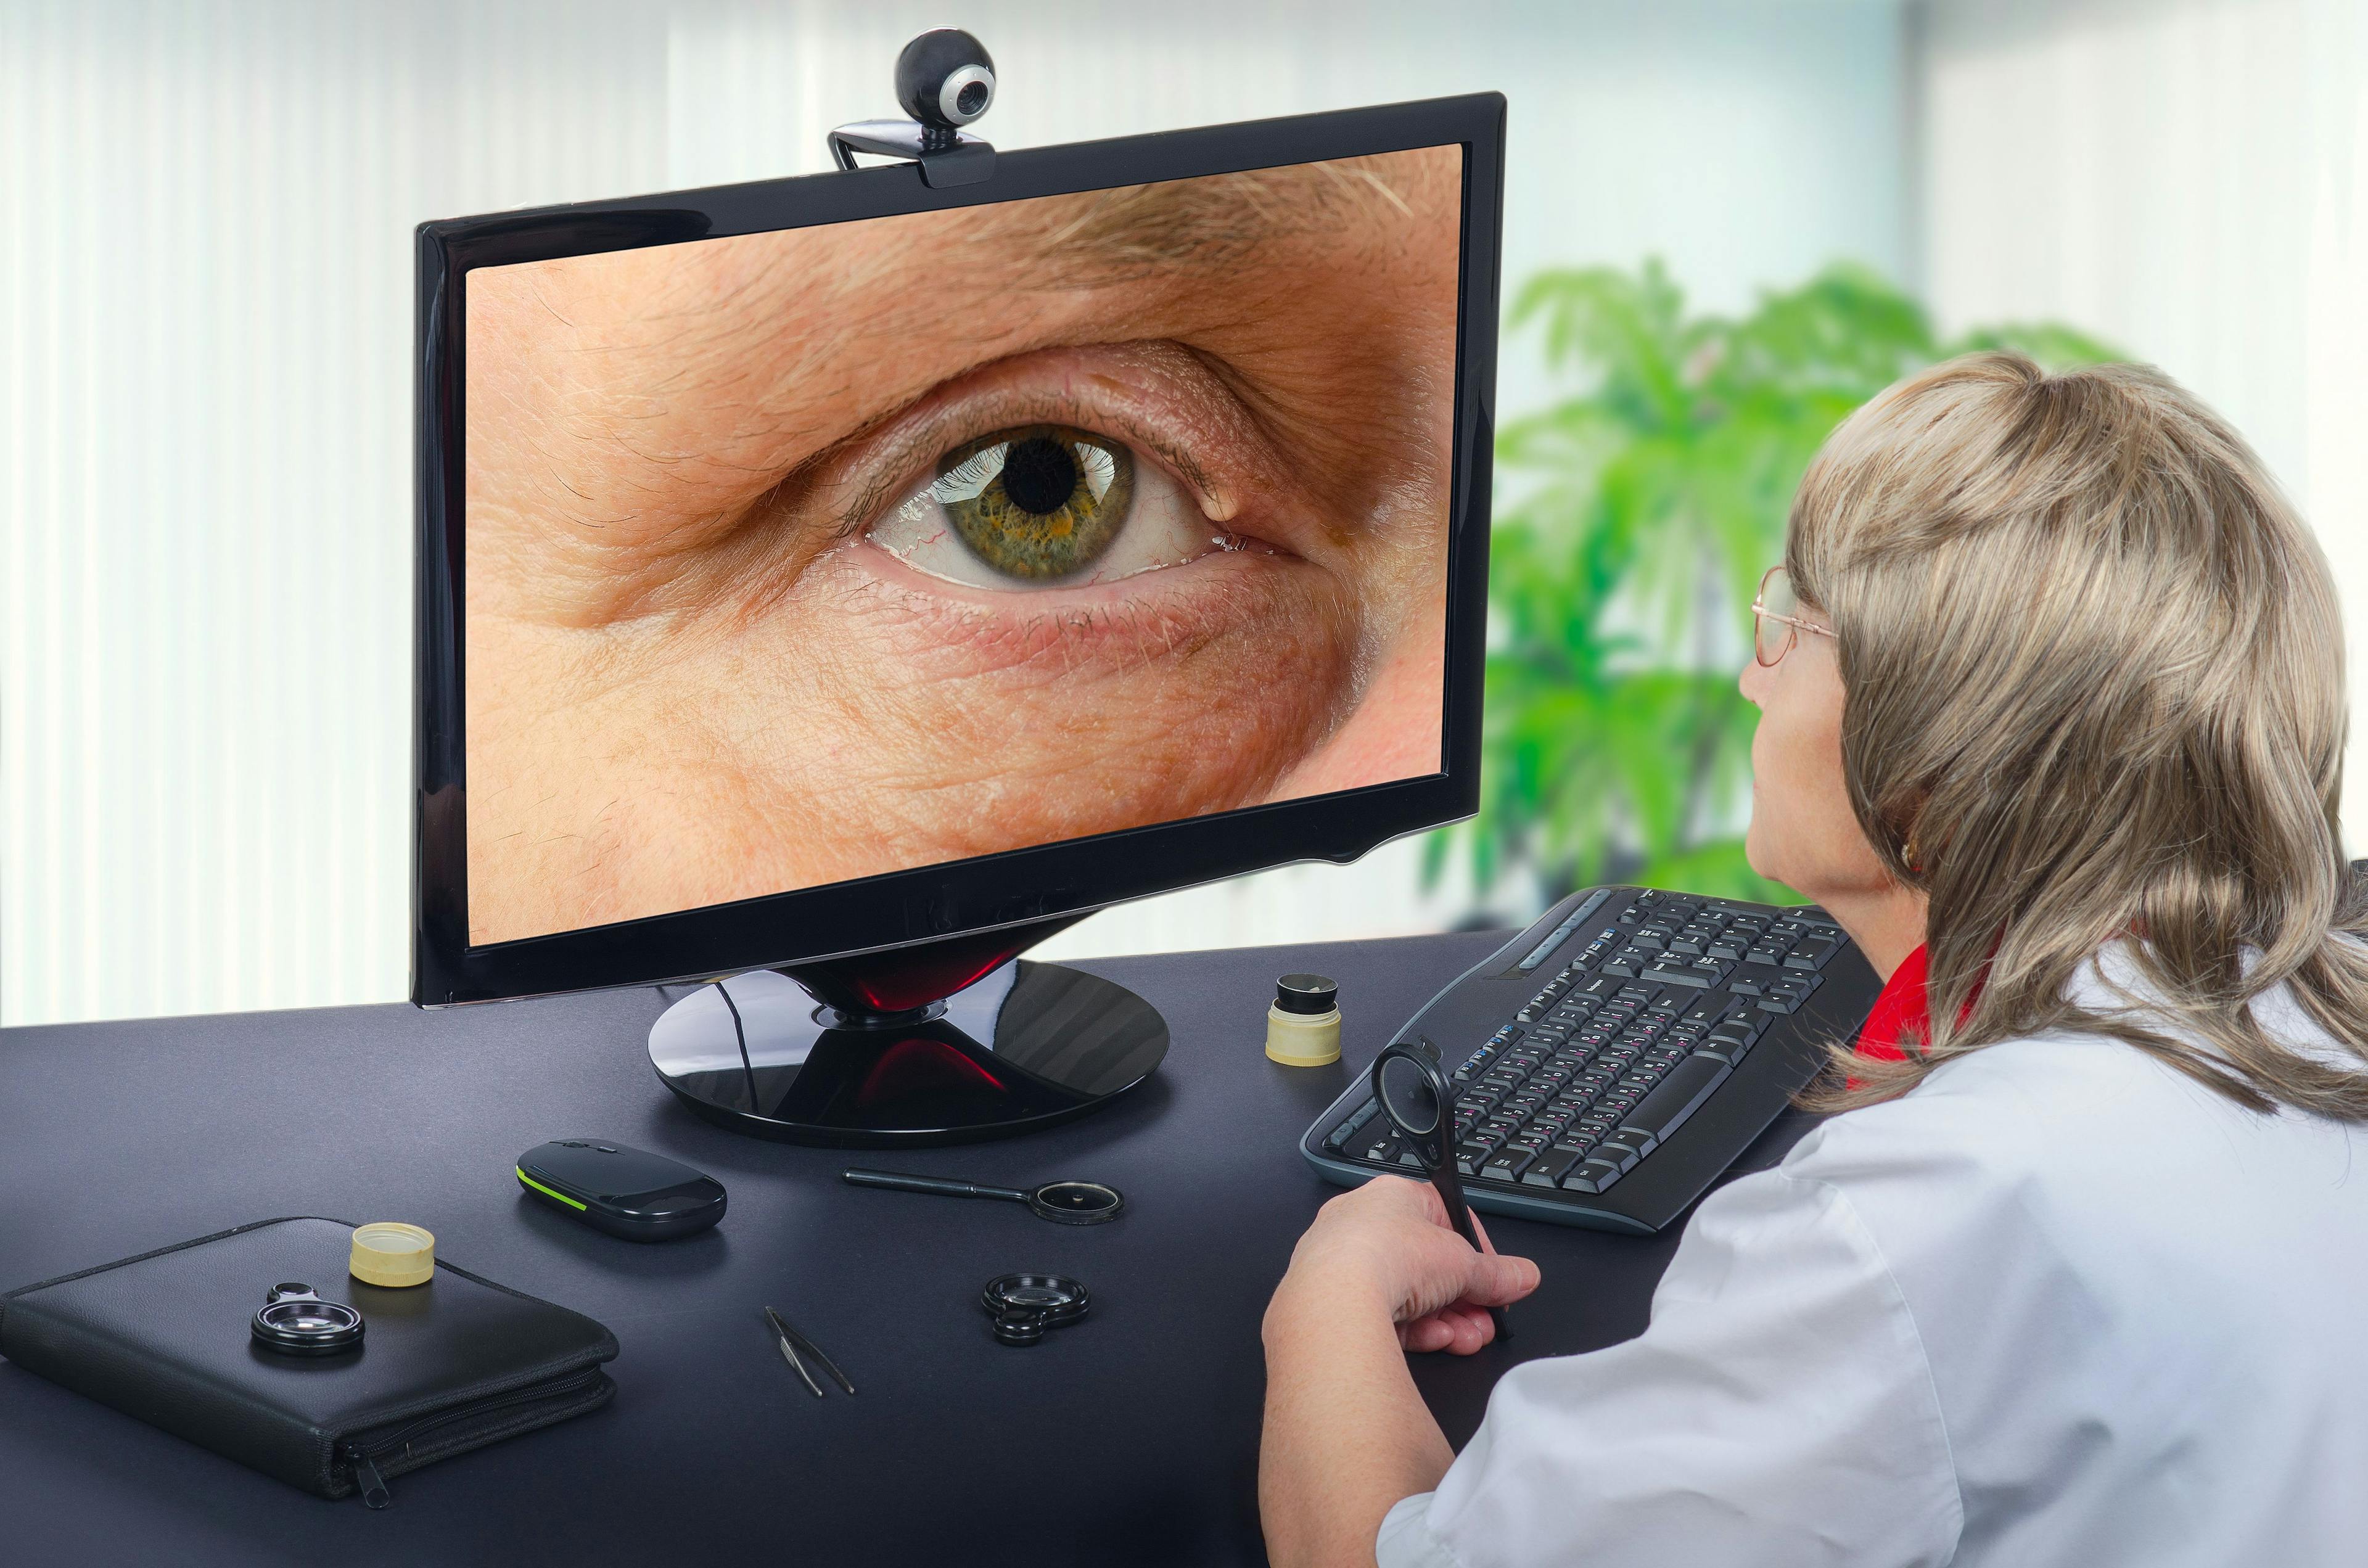 The time is now for optometry and telehealth